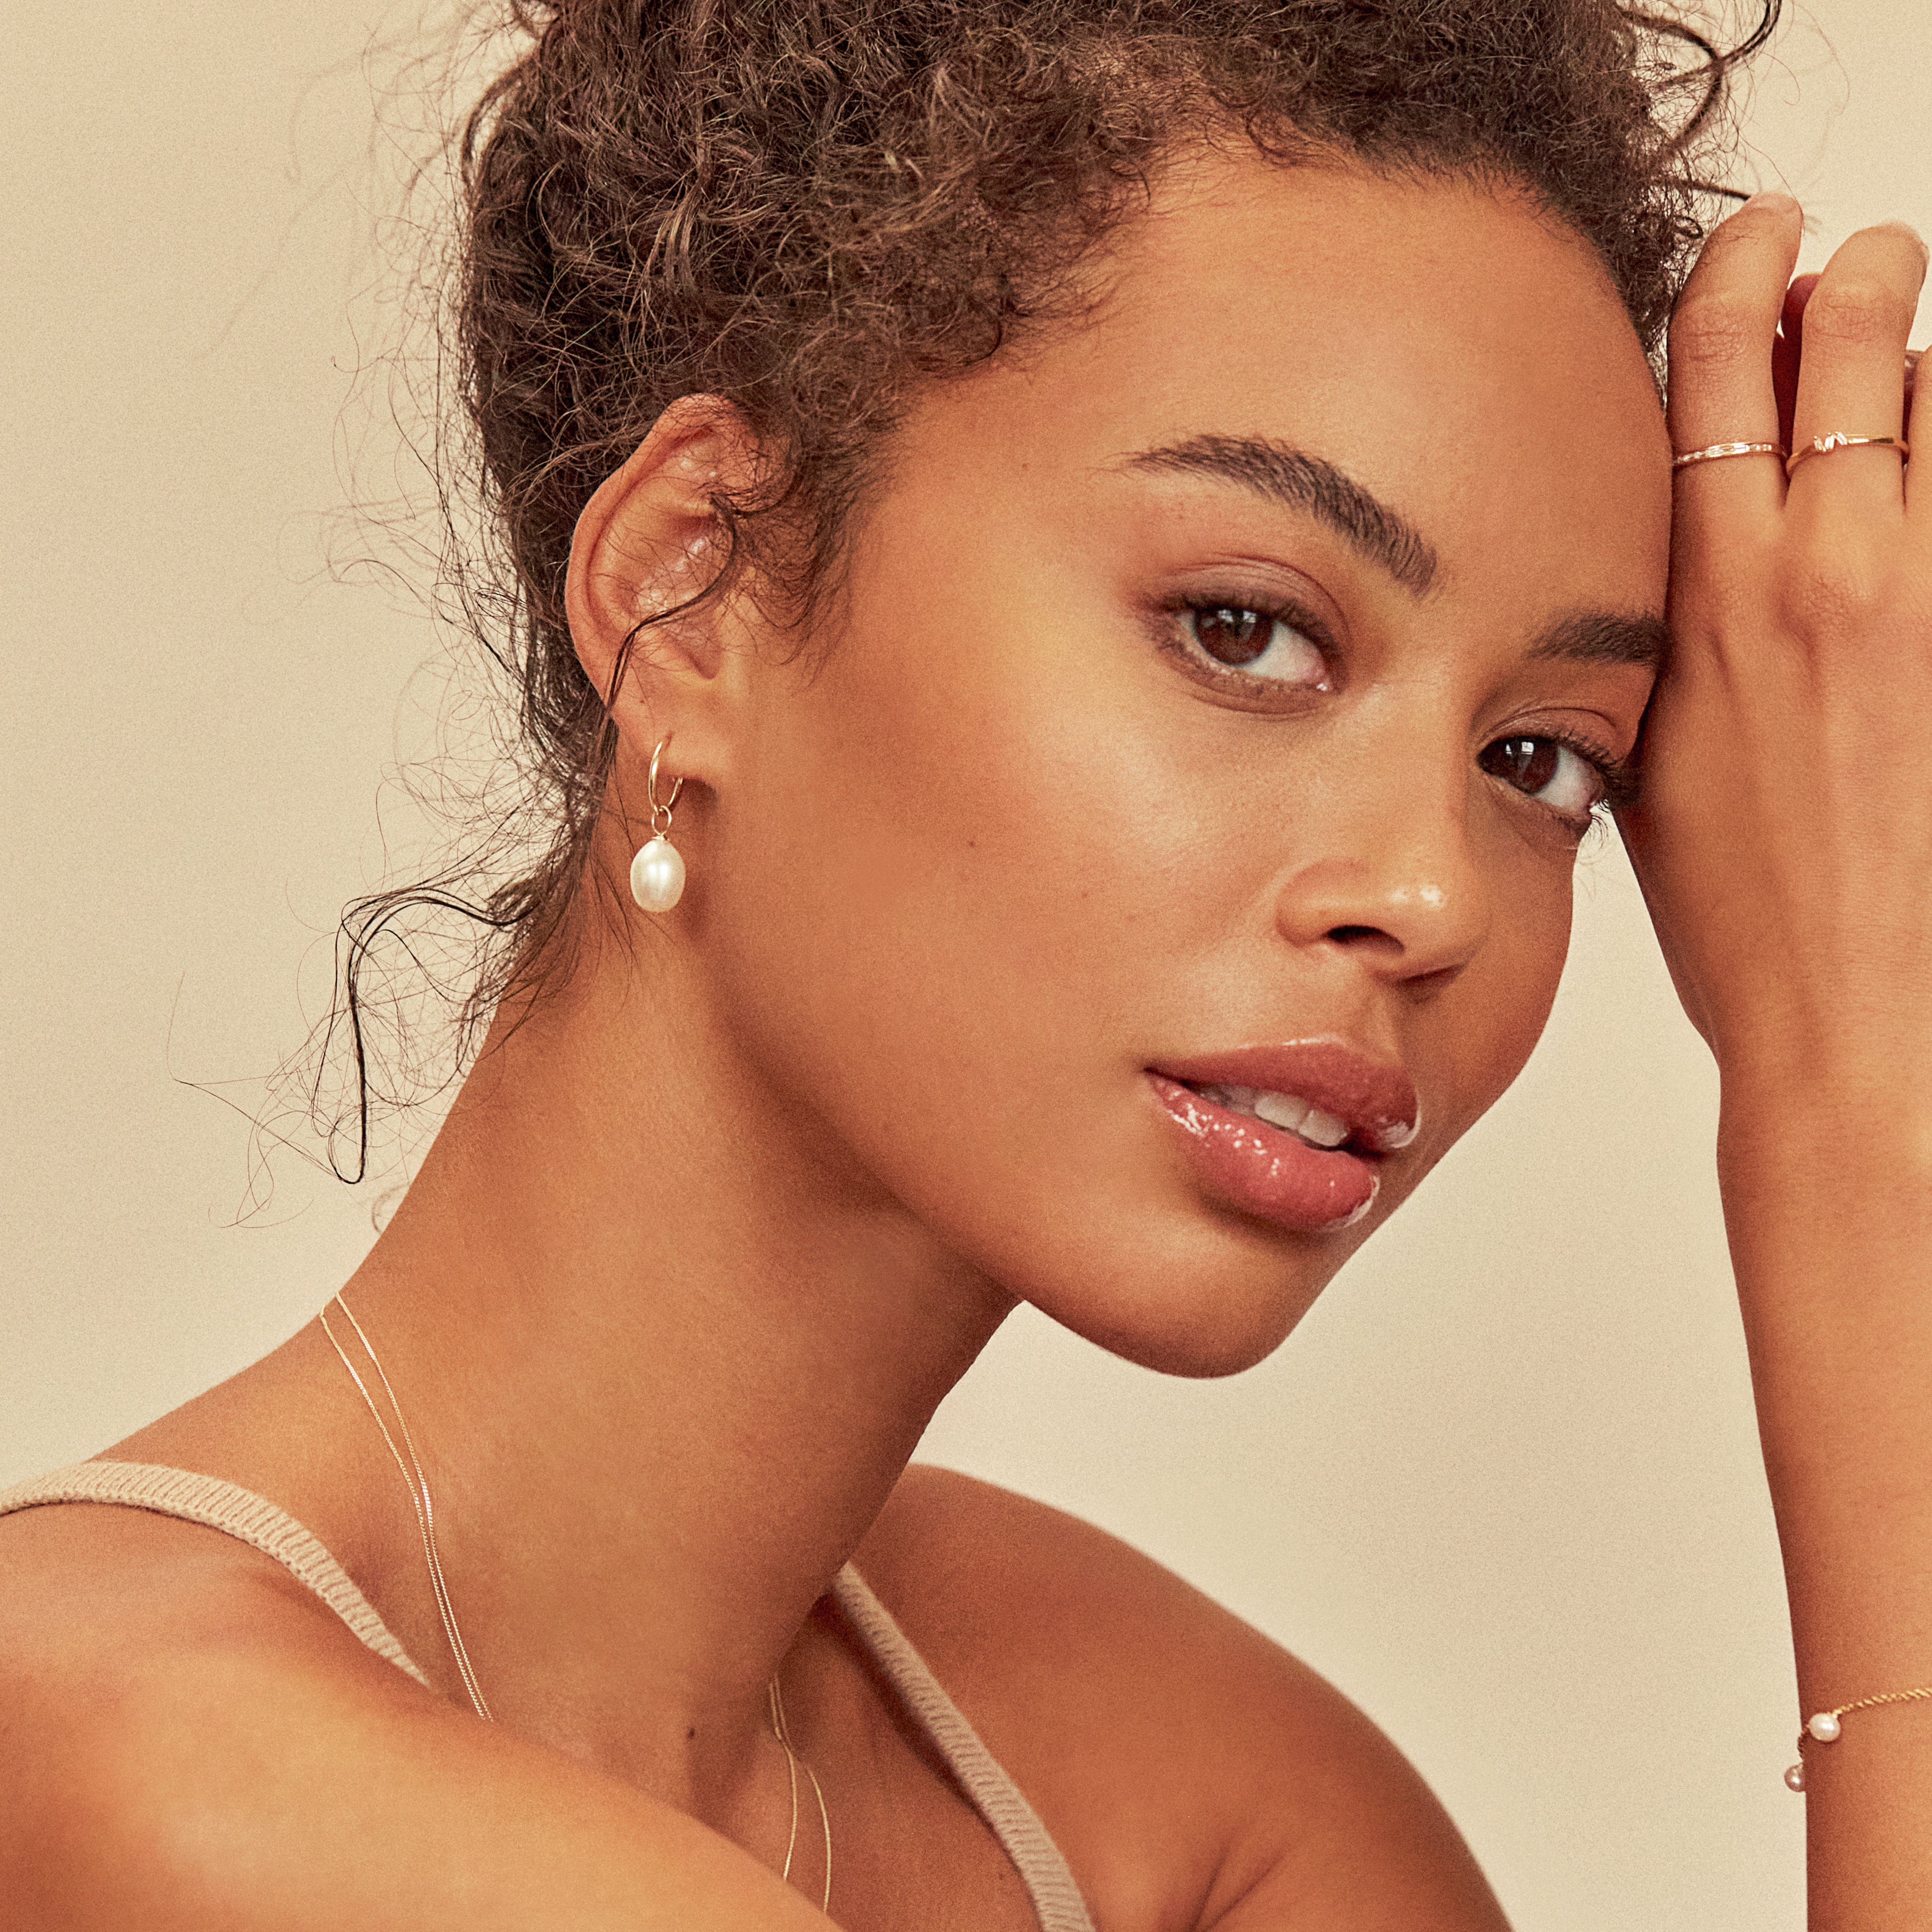 Solid gold large pearl drop hoop earring in an earlobe of a curly haired woman with her forehead resting on her hands